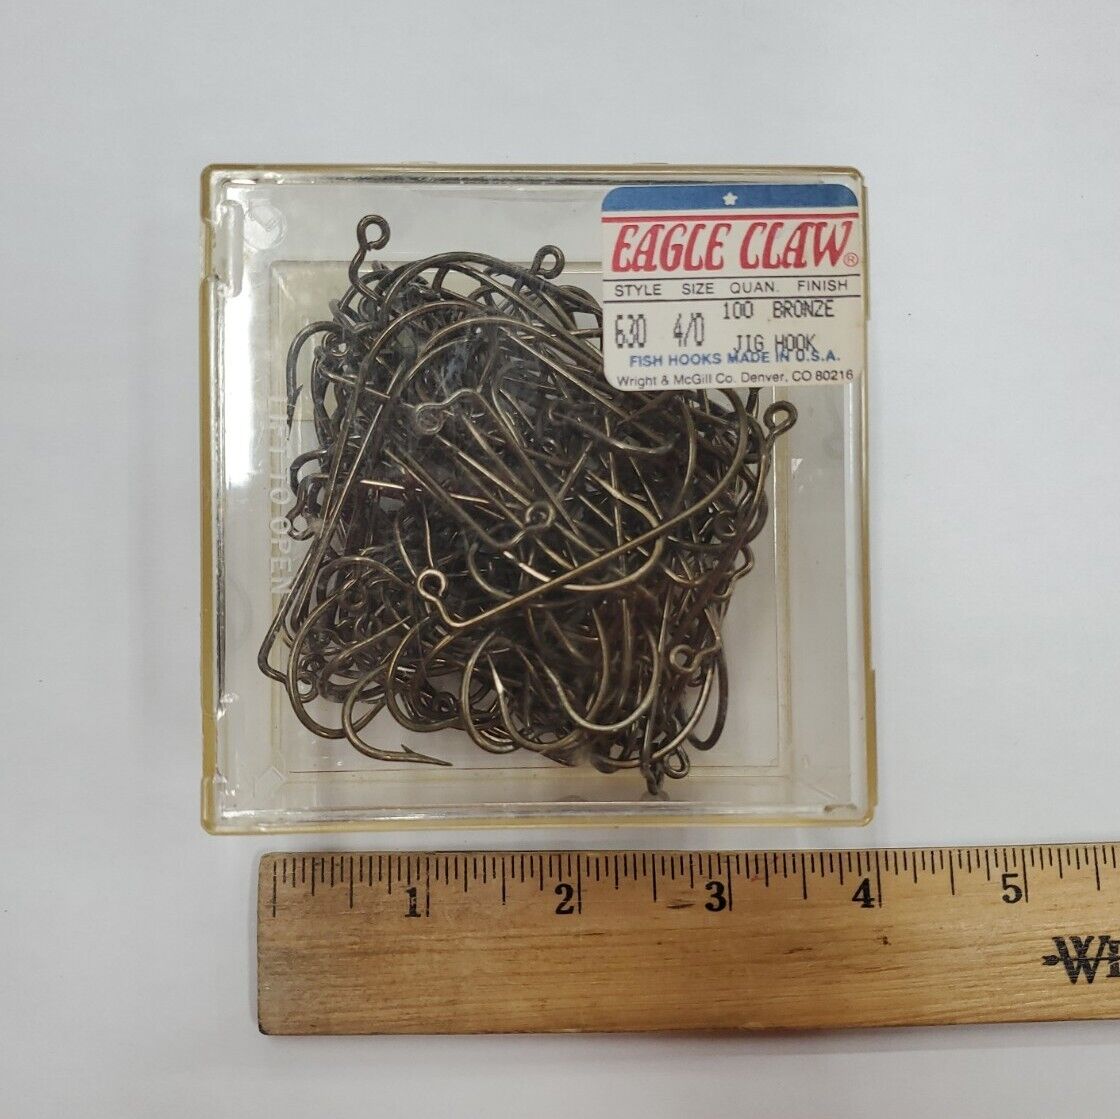 Eagle Claw 4/0 Jig Hooks - 100-pack - New